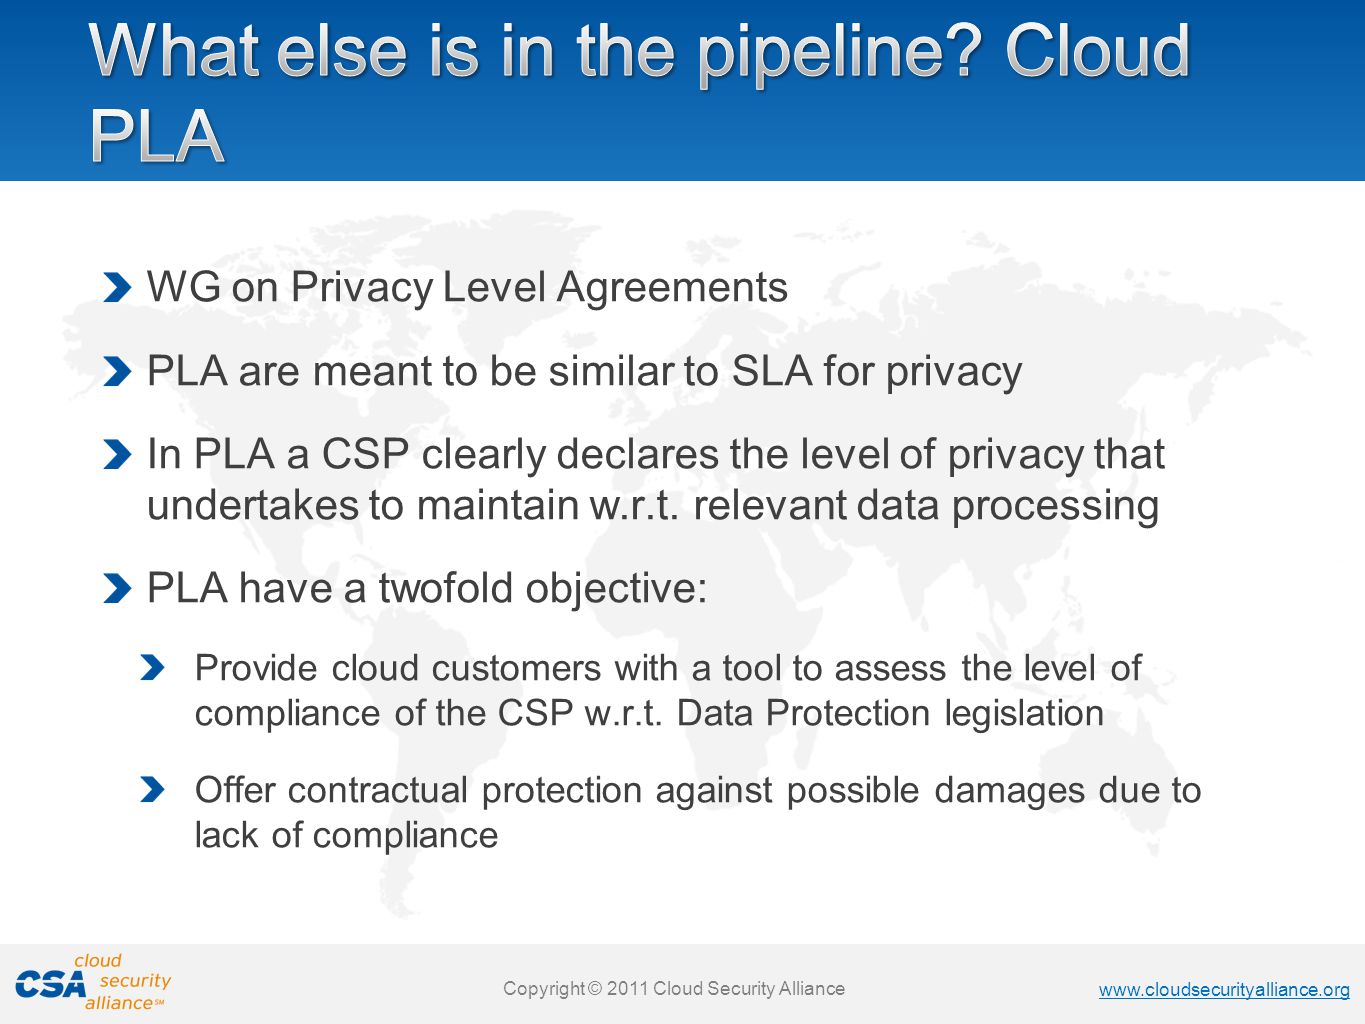 Copyright © 2011 Cloud Security Alliance   Copyright © 2011 Cloud Security Alliance   Copyright © 2011 Cloud Security Alliance   Copyright © 2011 Cloud Security Alliance WG on Privacy Level Agreements PLA are meant to be similar to SLA for privacy In PLA a CSP clearly declares the level of privacy that undertakes to maintain w.r.t.